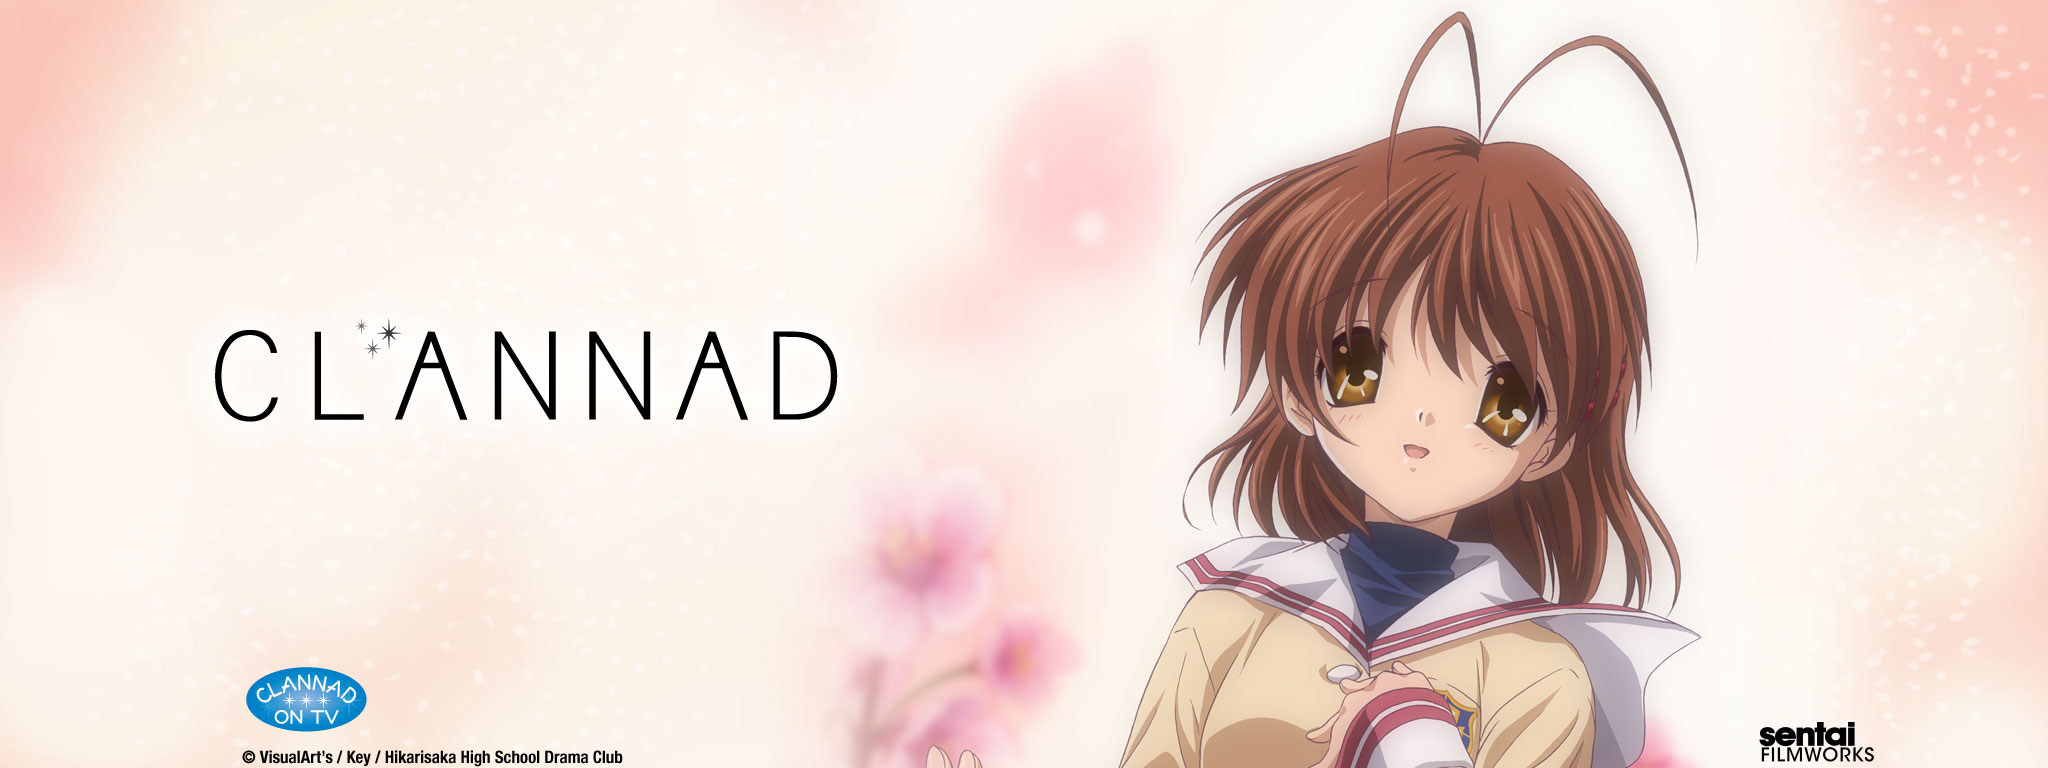 Title Art for Clannad